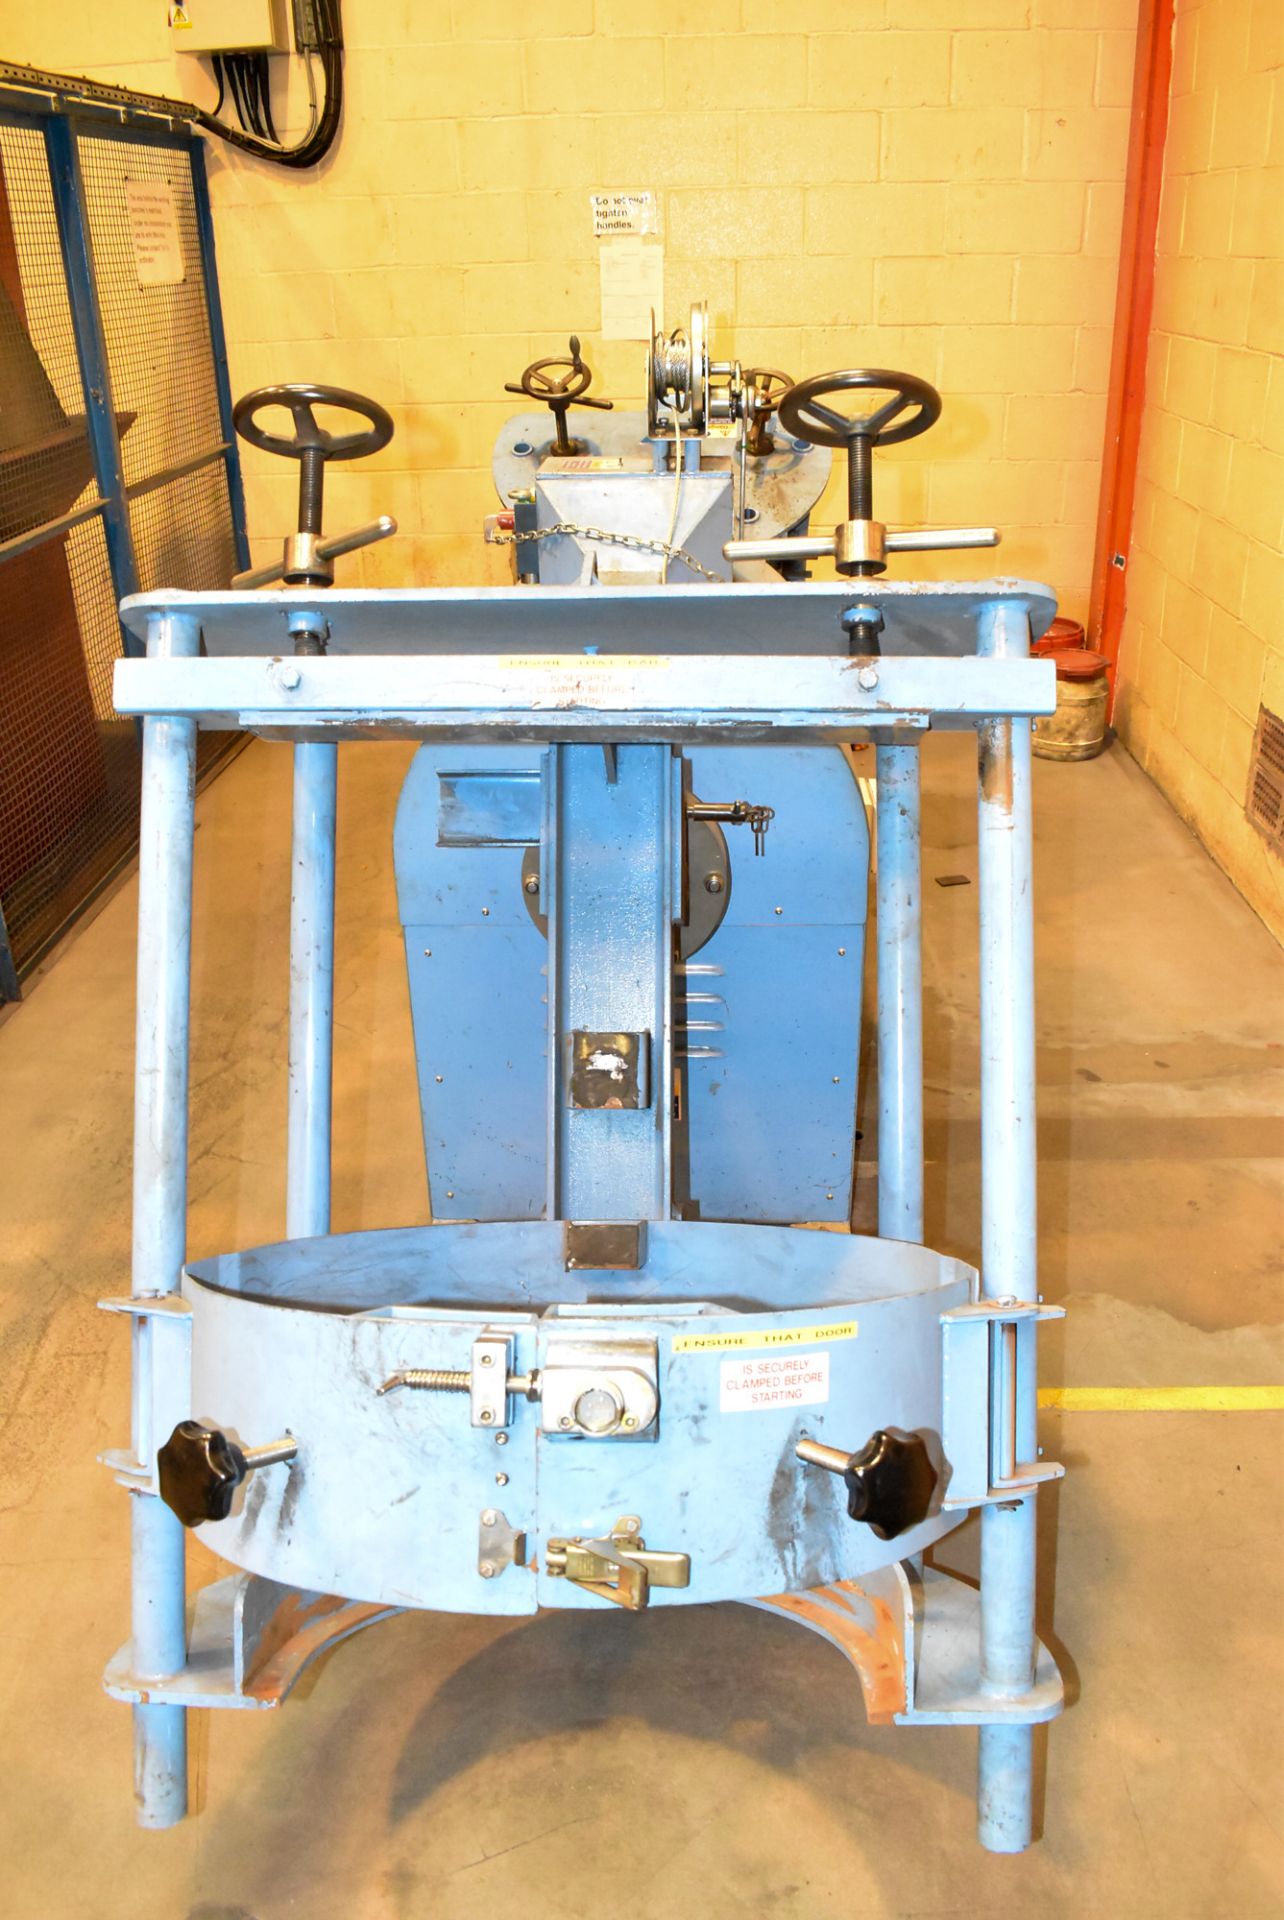 WINKWORTH (2010) CT222 BARREL SWING-TYPE MIXER/BLENDER WITH VARIABLE SPEED & DIGITAL TIMER - Image 5 of 7